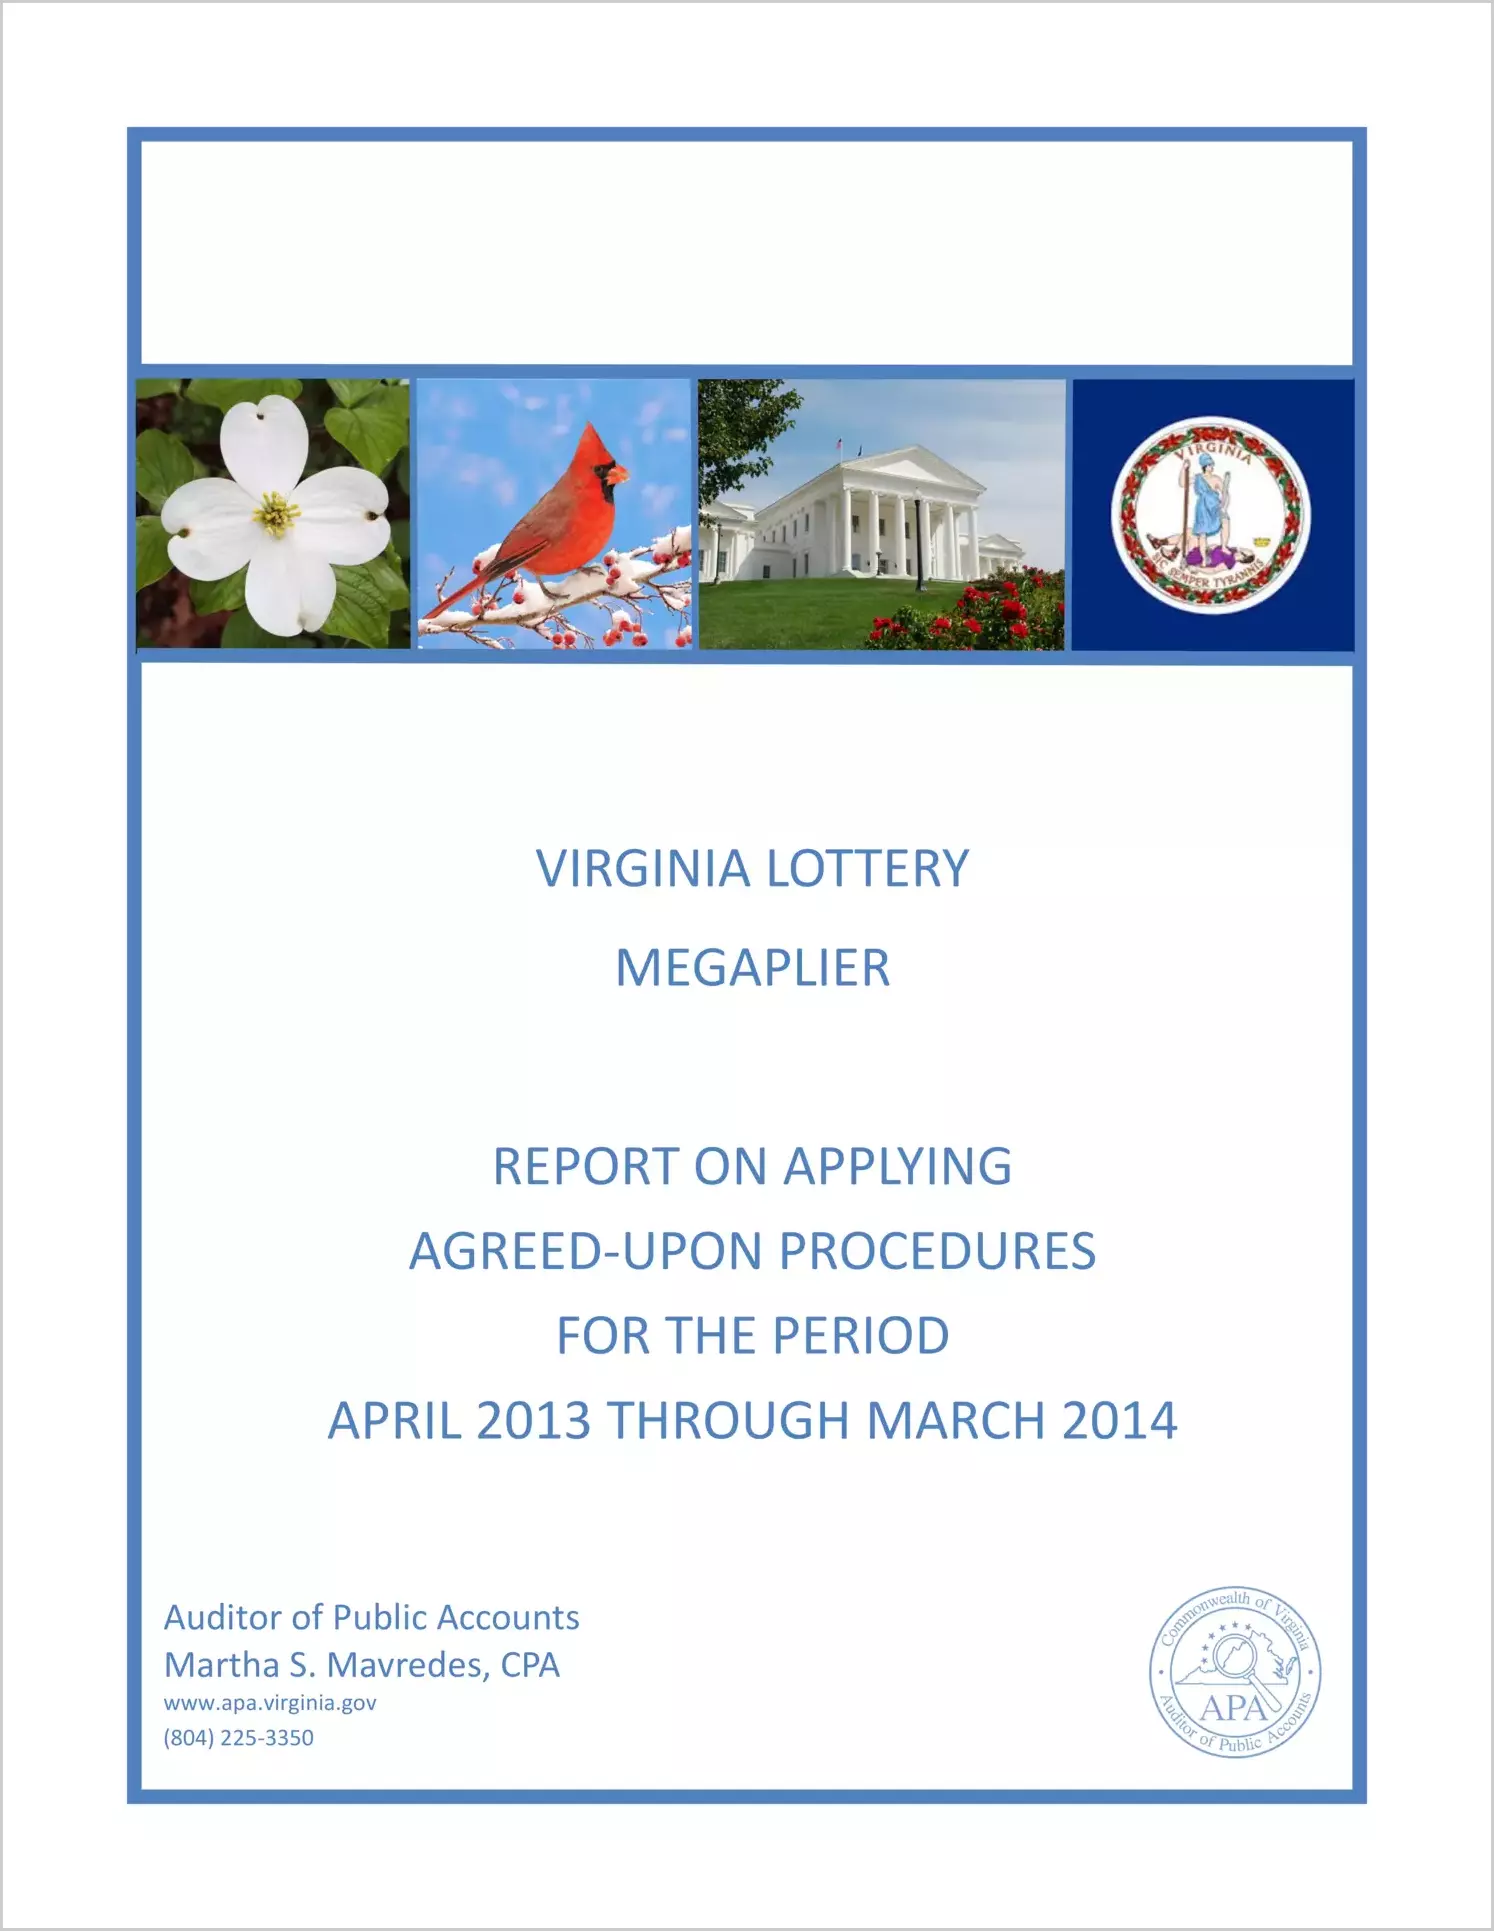 VA Lottery Megaplier report on Applying Agreed-Upon Procedures for the period April, 2013 through March, 2014